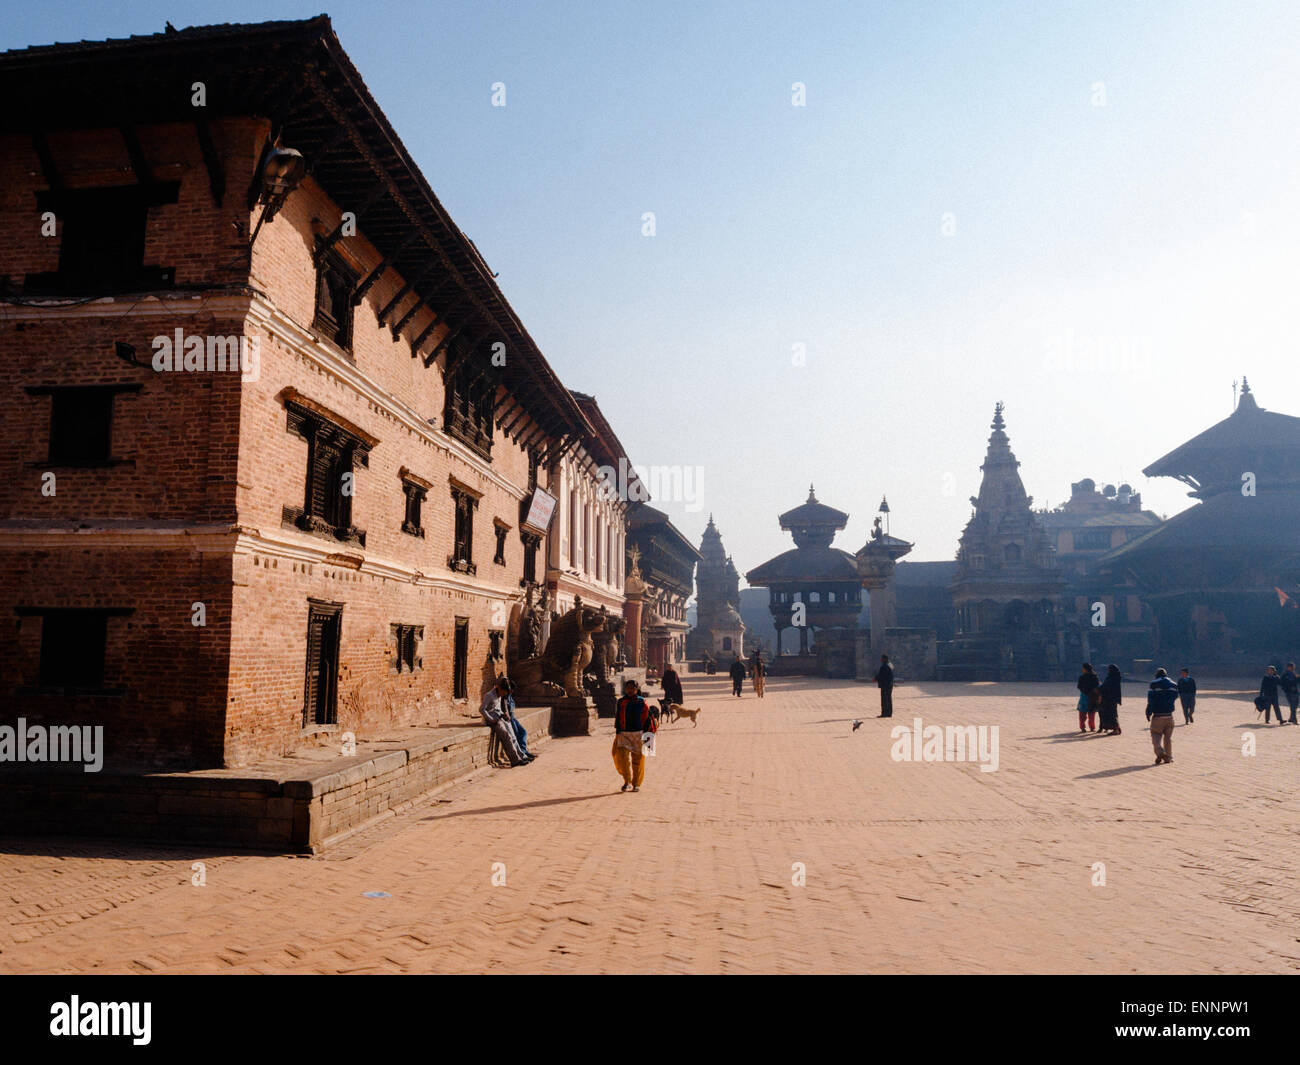 Bhaktapur's Durbar Square with historic royal buildings and temples, Nepal Stock Photo